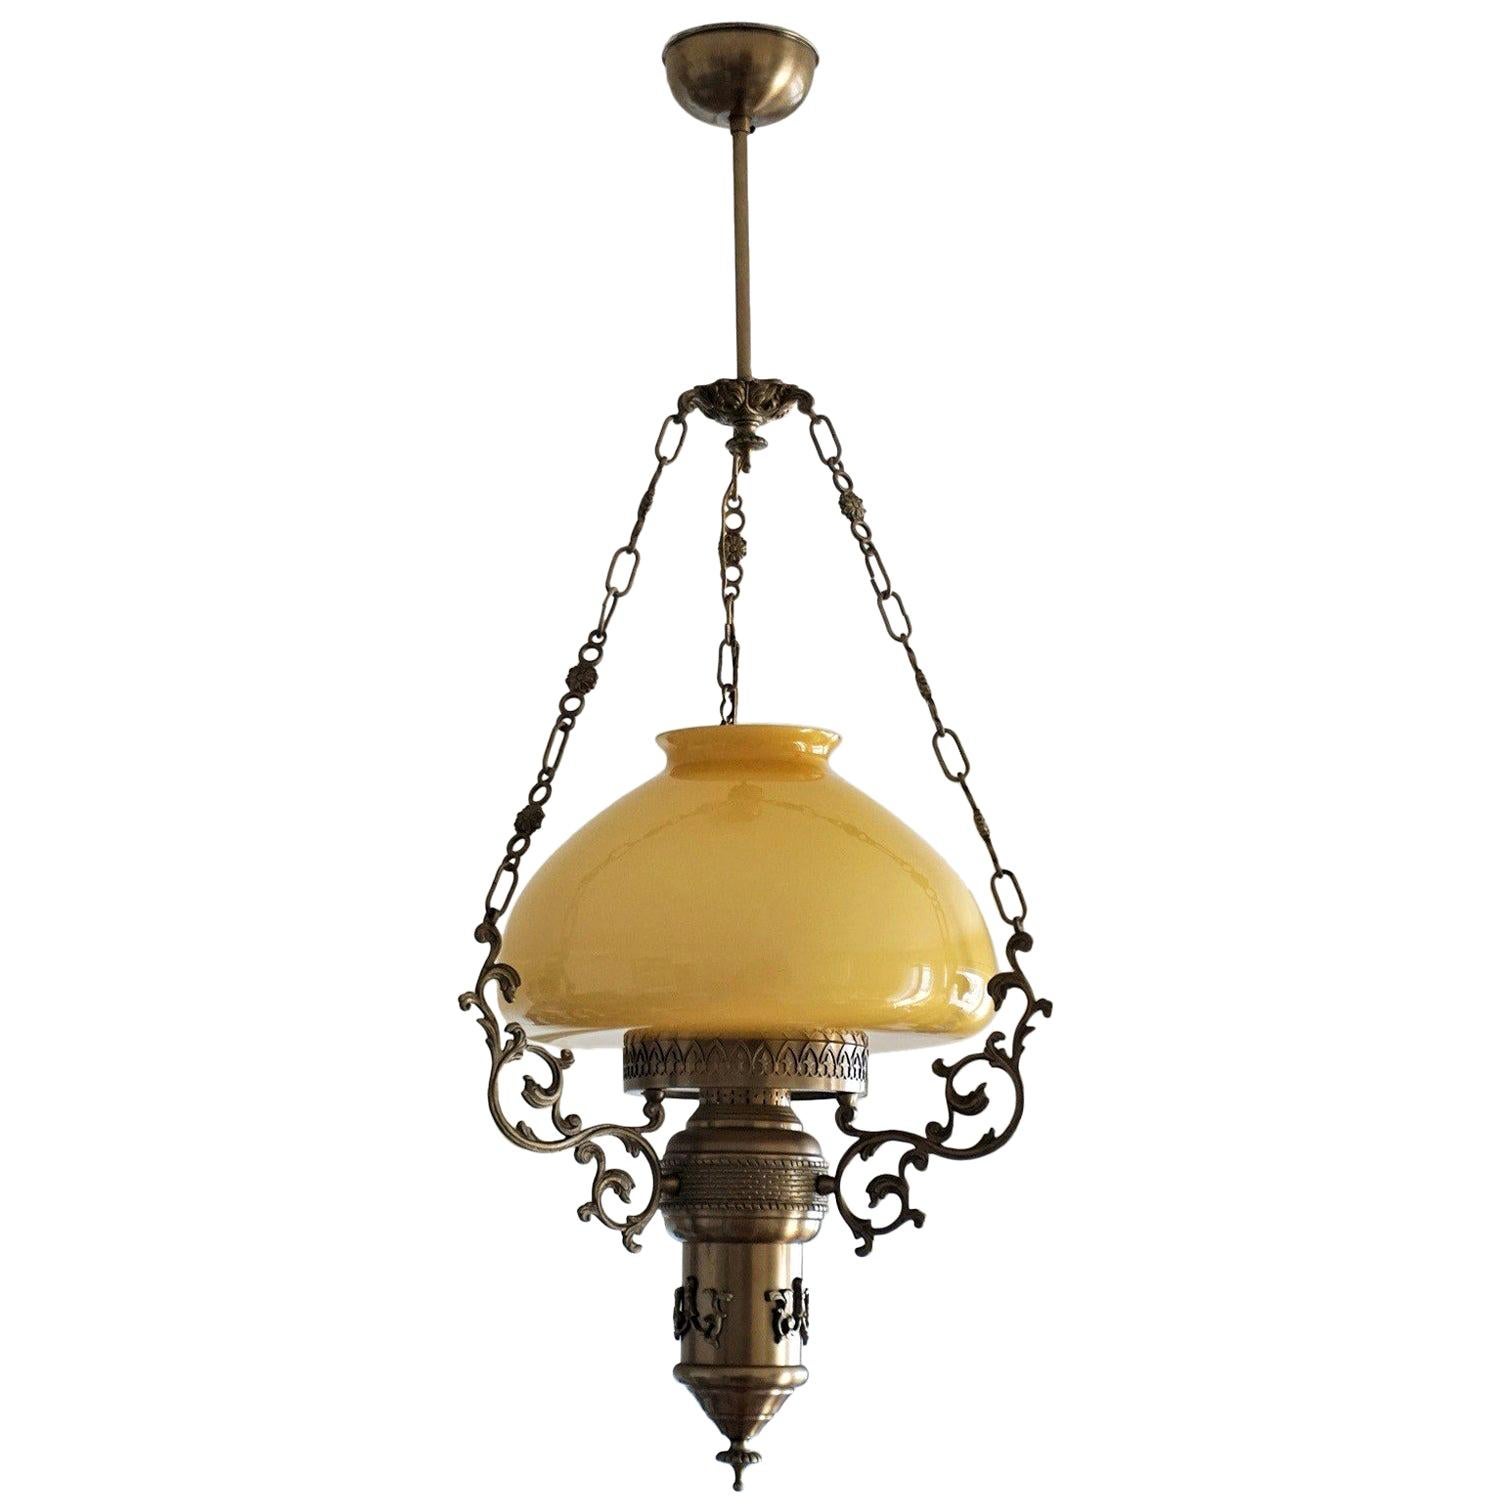 Burnished brass and opaline glass suspension lantern in Art Nouveau style, circa 1950. Three brass hanging chains connected to a decorative canopy. A tall clear glass chimney is included.
One E27 light bulb holder.
Measures:
Height 36.25 in (92